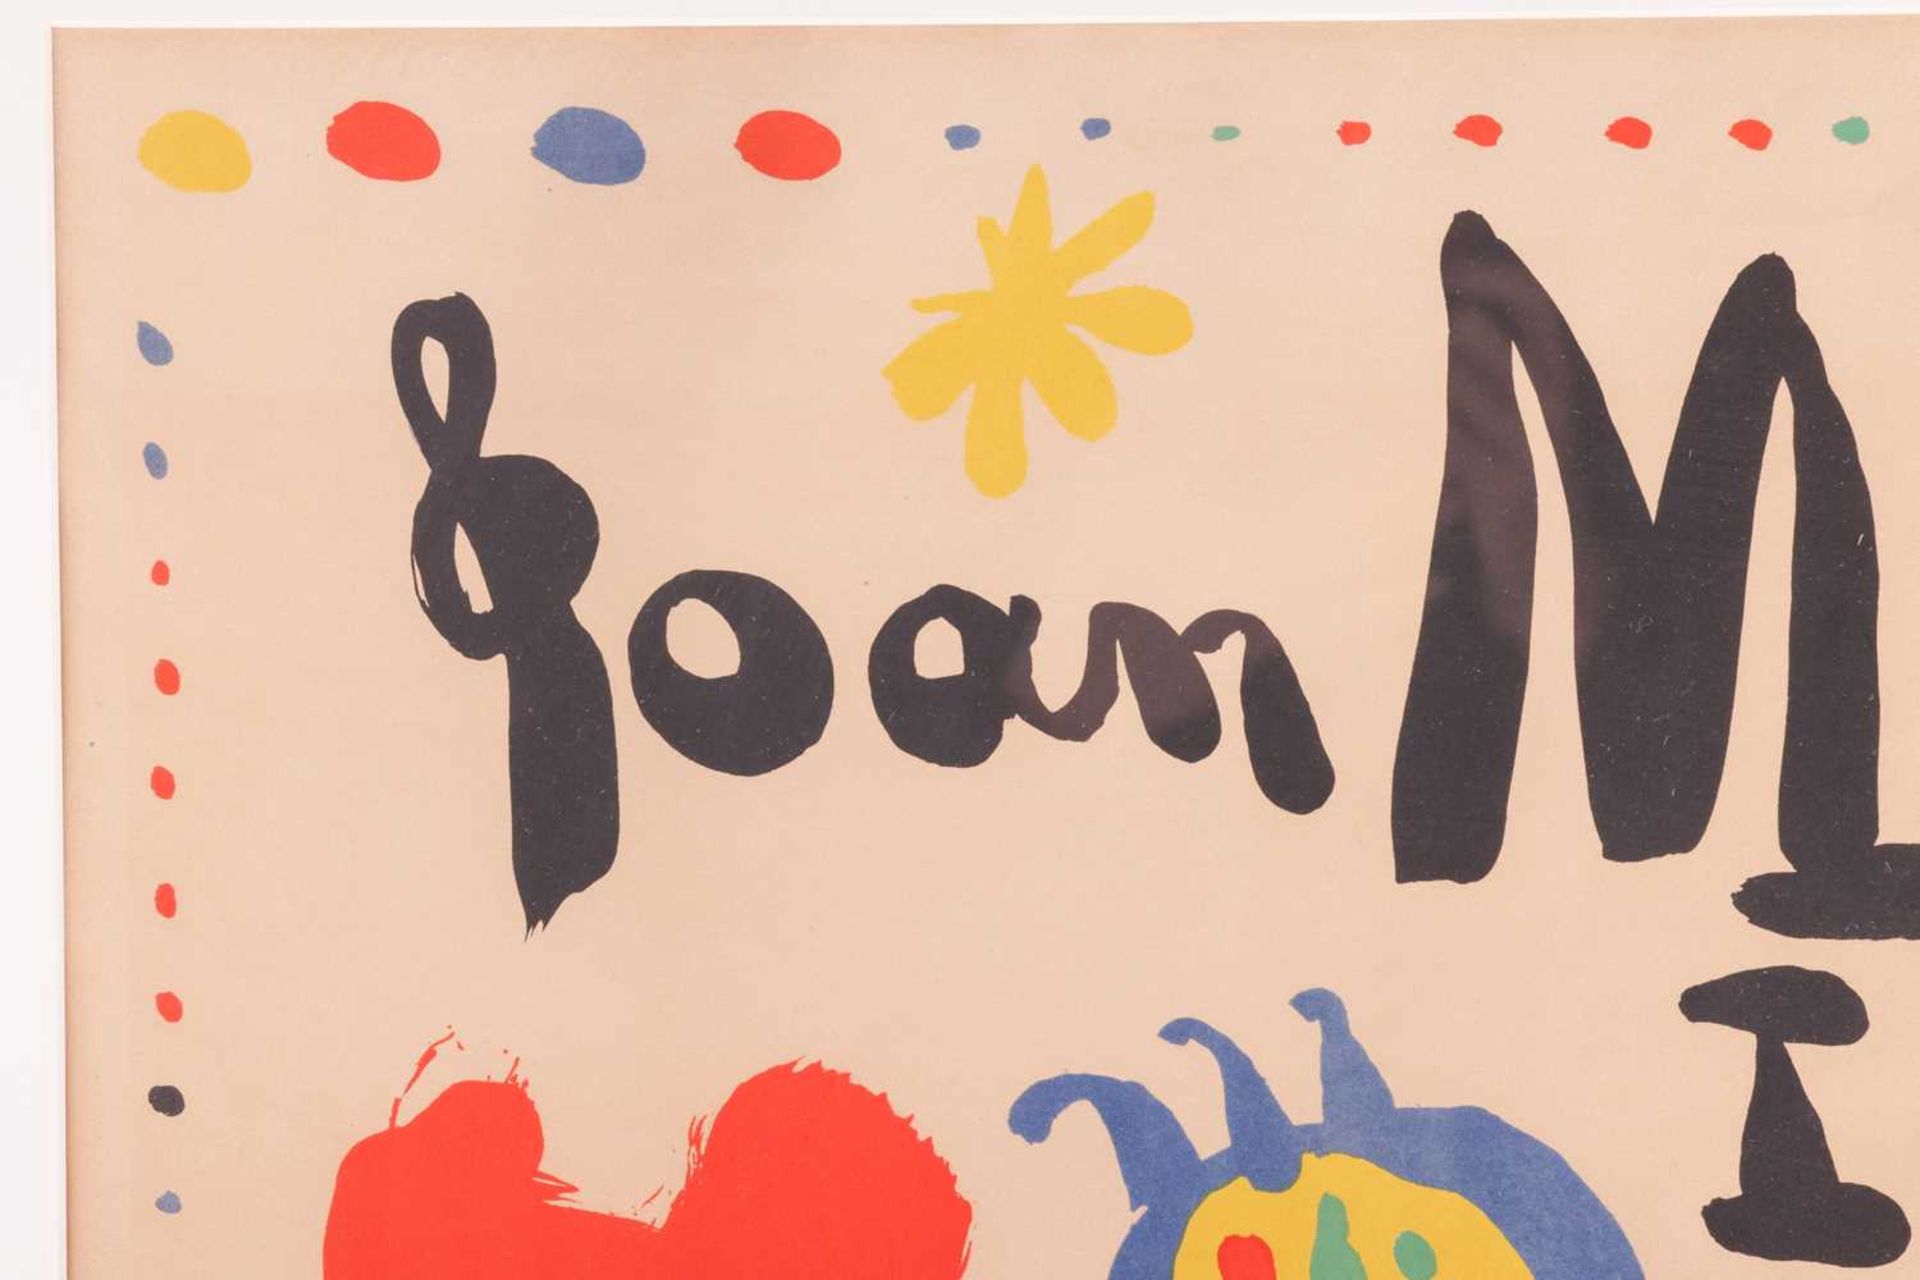 Joan Miro (Spanish, 1893 - 1983), Poster for Exhibition of 1948, signed in pencil (lower left), - Image 4 of 7